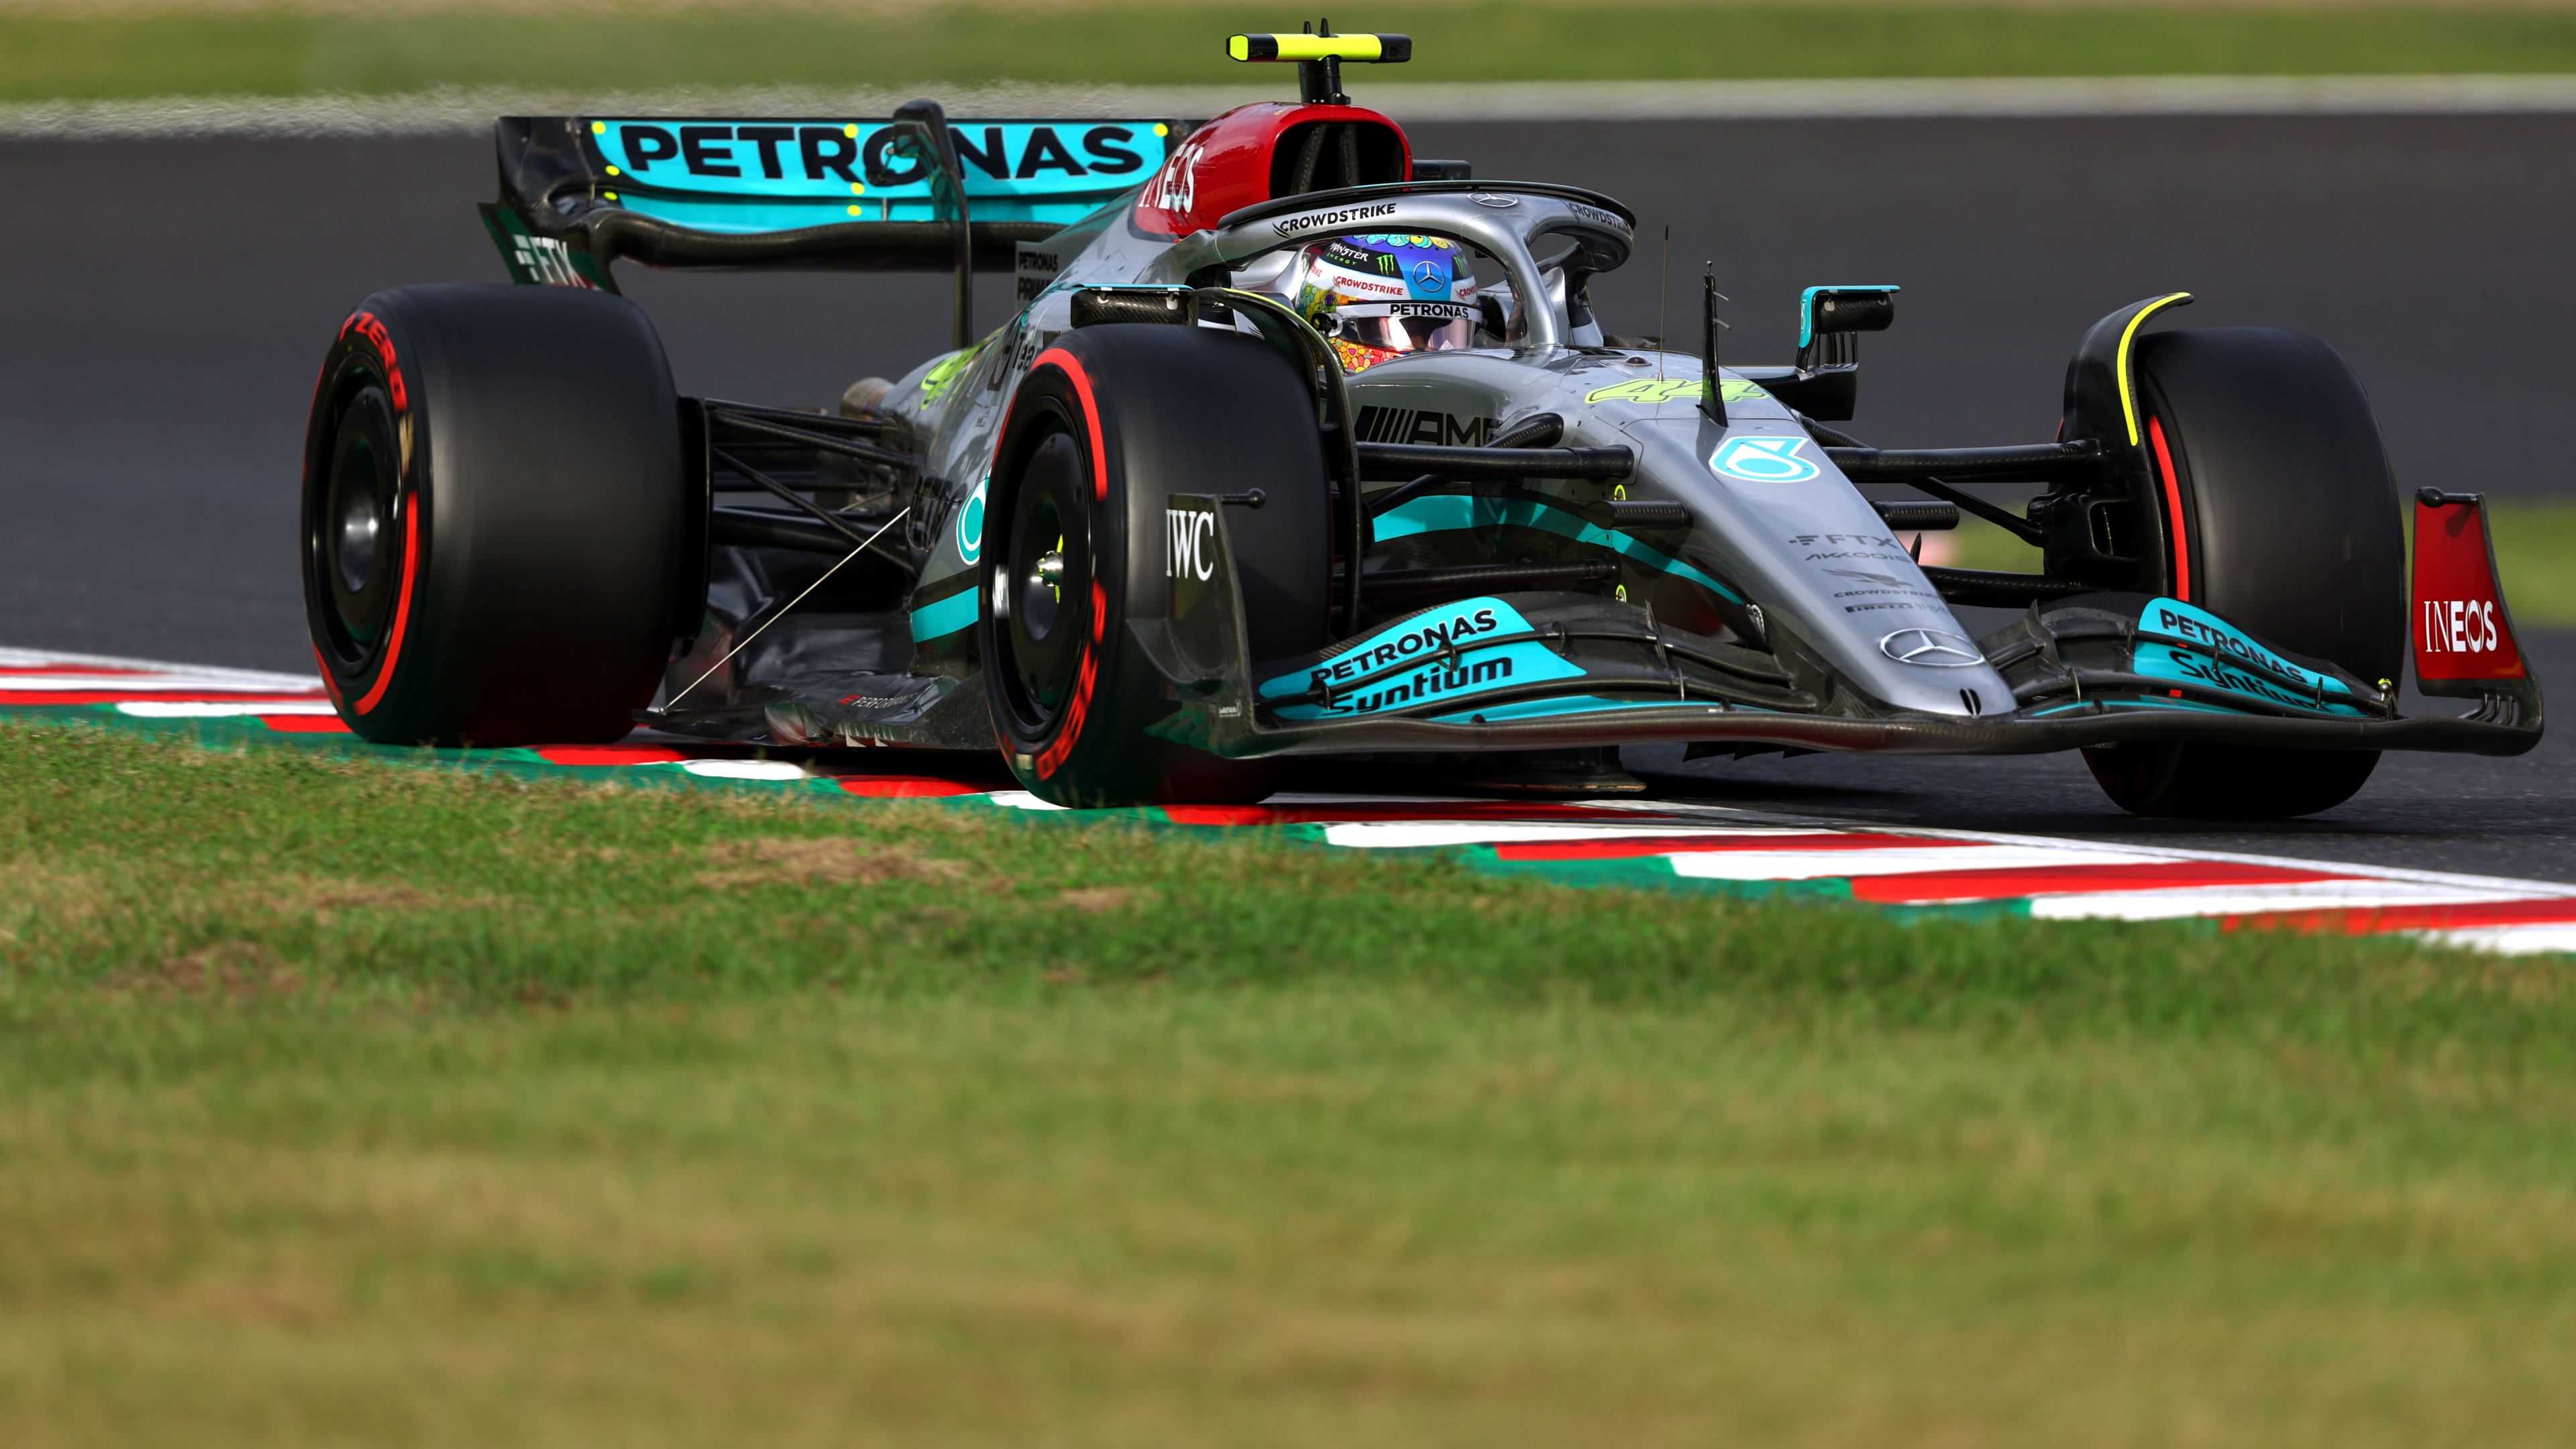 Mercedes drivers say their weakness was truly exposed in Suzuka qualifying after taking P6 and P8 Formula 1®